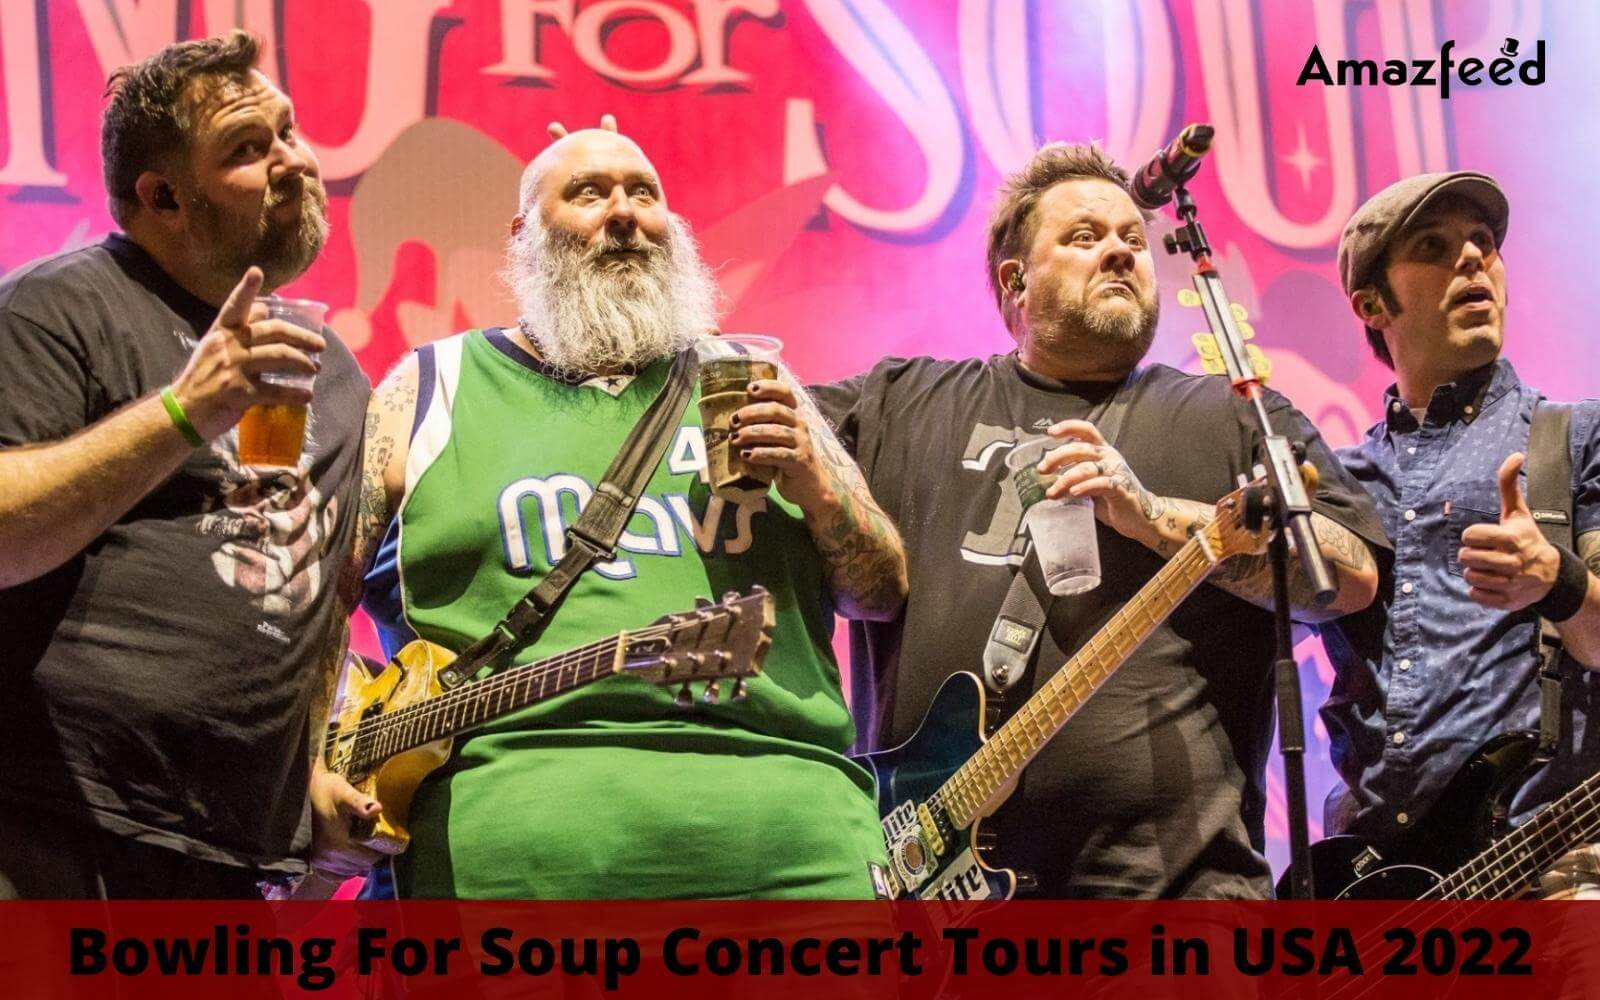 Bowling For Soup Setlist 2022, Concert Tour Dates in 2022 | USA | Set List, Band Members